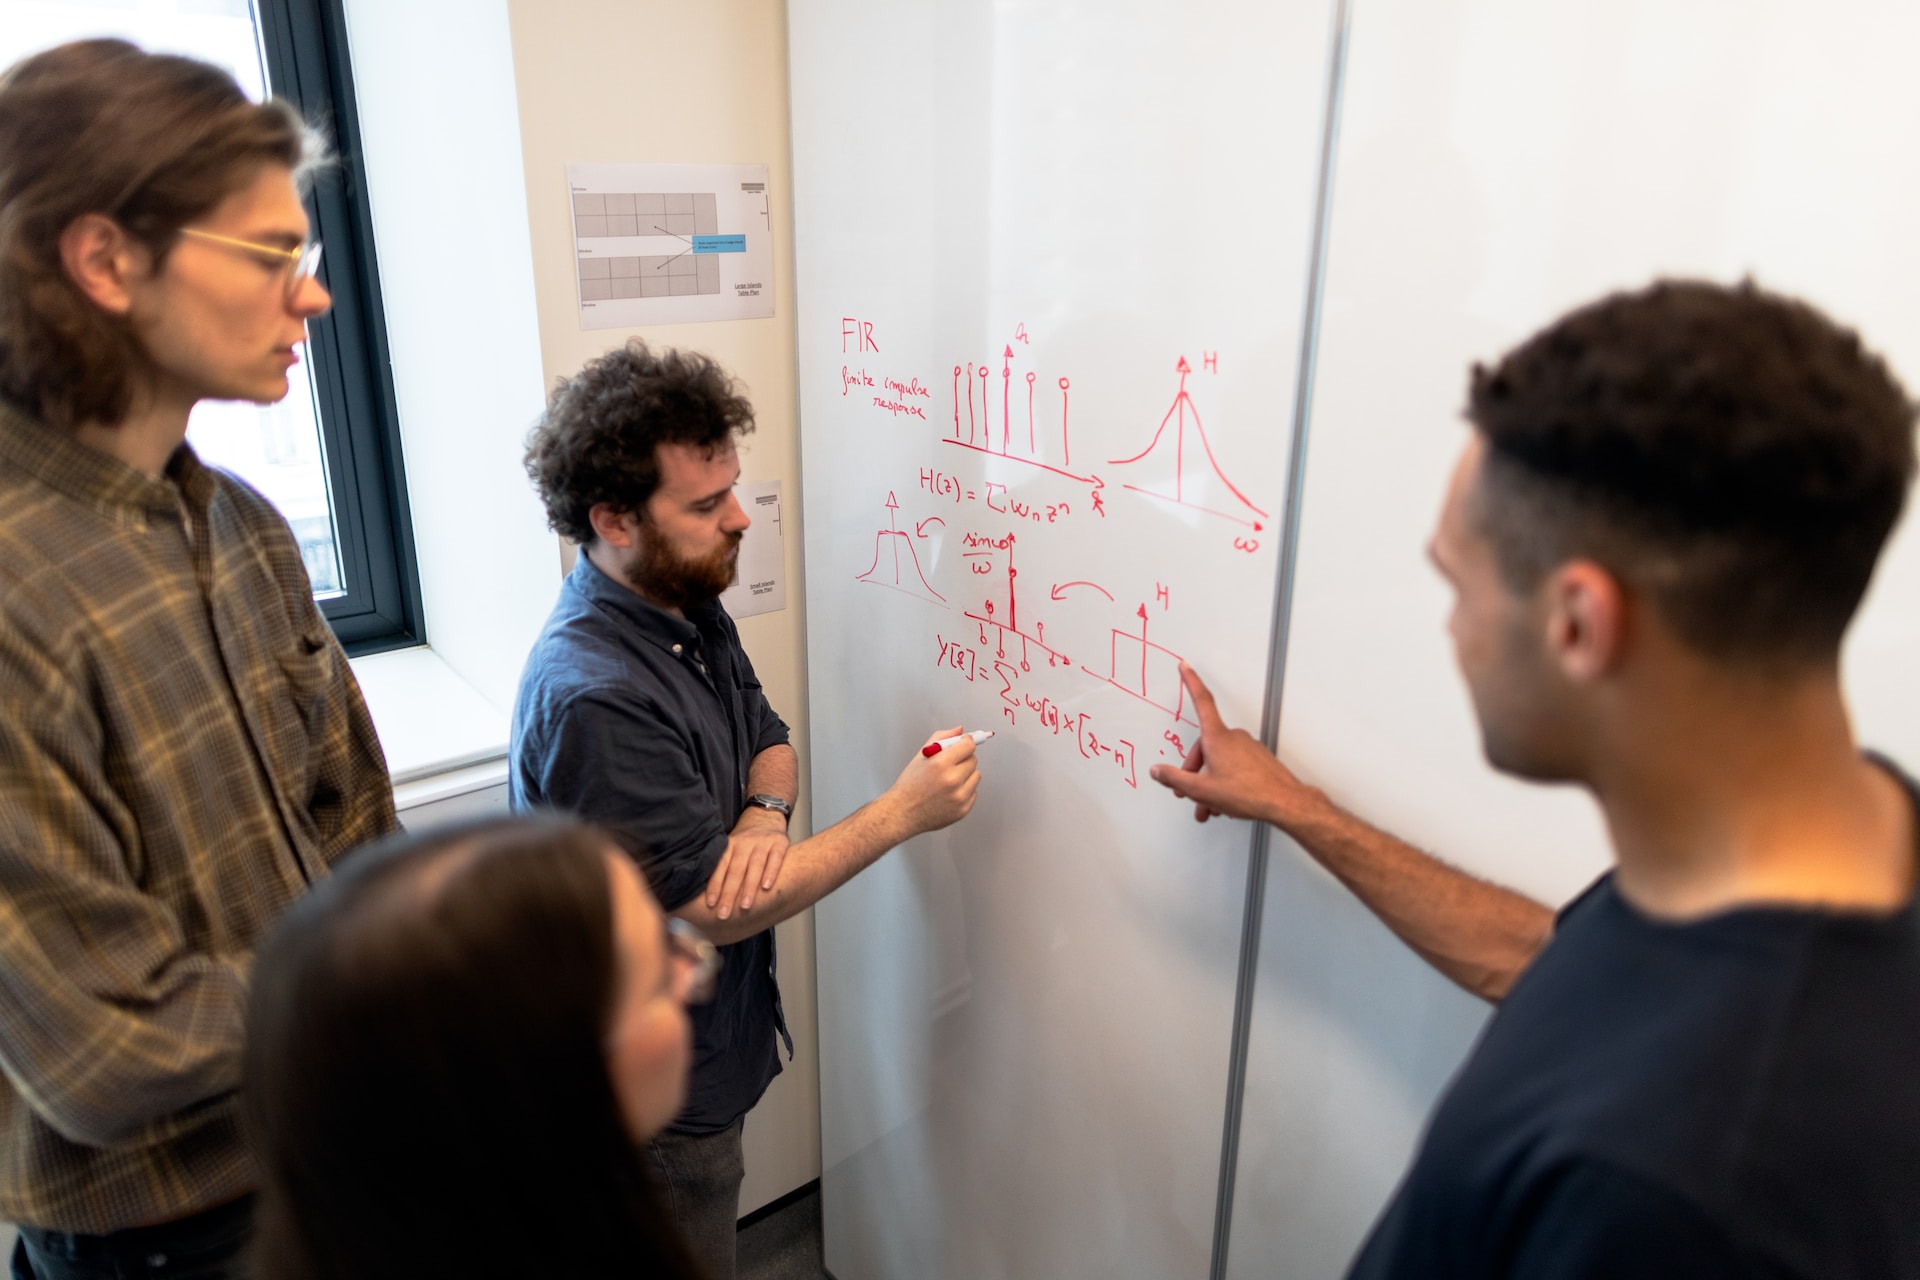 A photograph of colleagues meeting to discuss data in front of a whiteboard displaying graphs and mathematical formulae written in red marker pen.